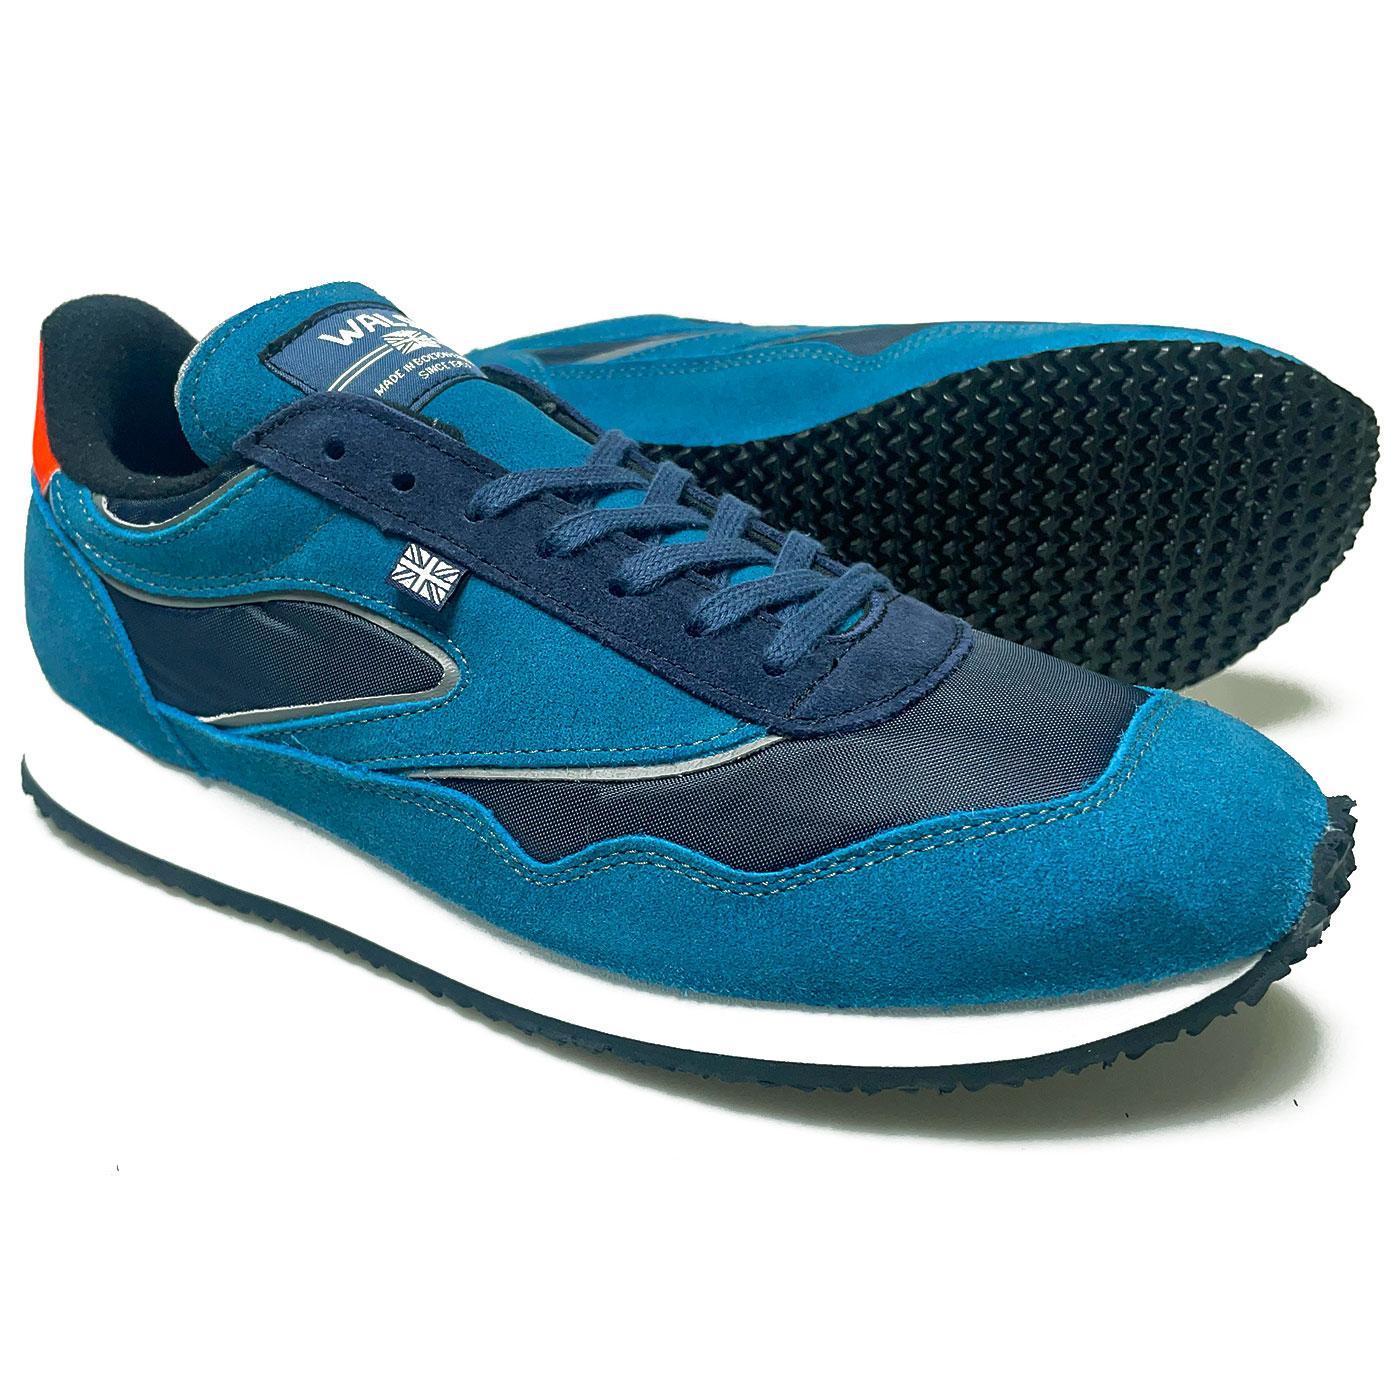 Walsh Ensign Classic II Retro 80s Trainers in Navy Teal Orange